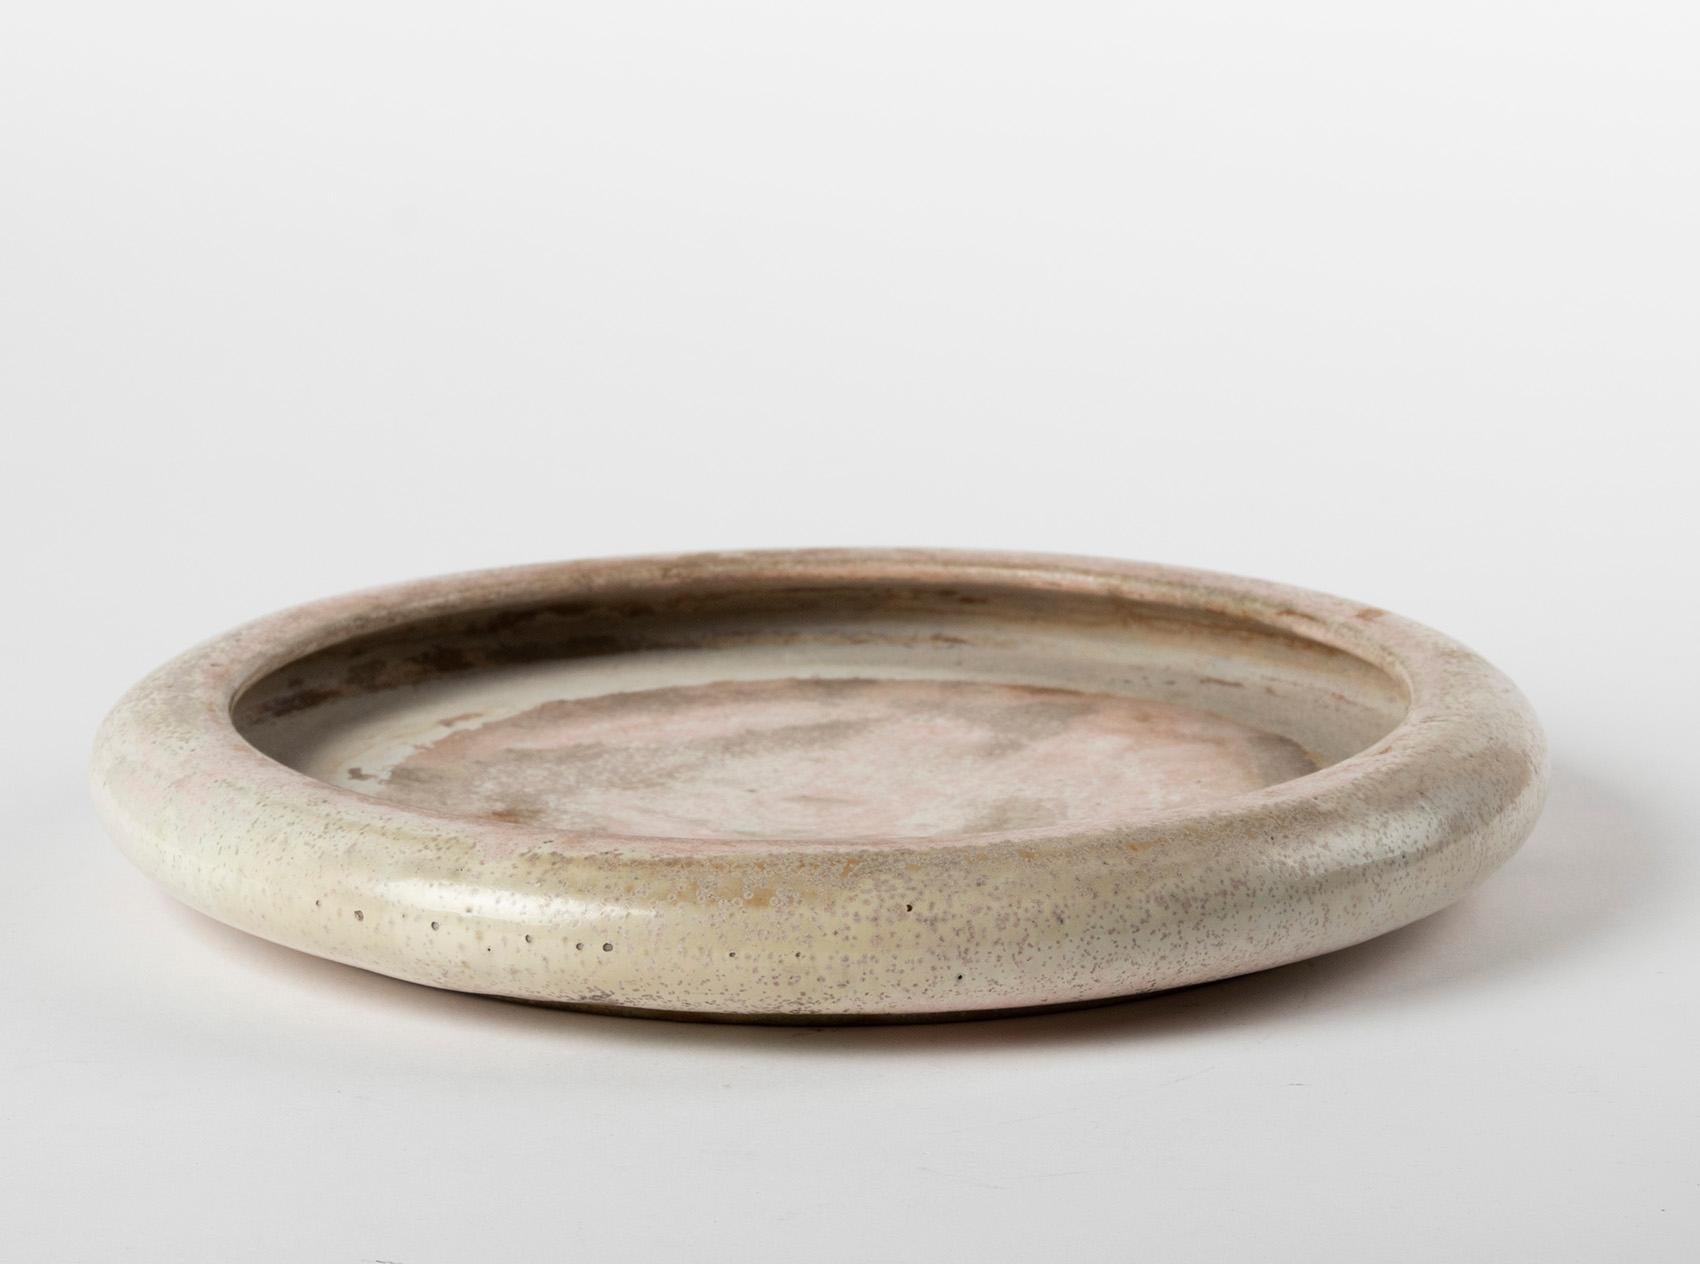 Hand-Crafted Mid-Century Modern Round Ceramic Dish Made by Guérin, France